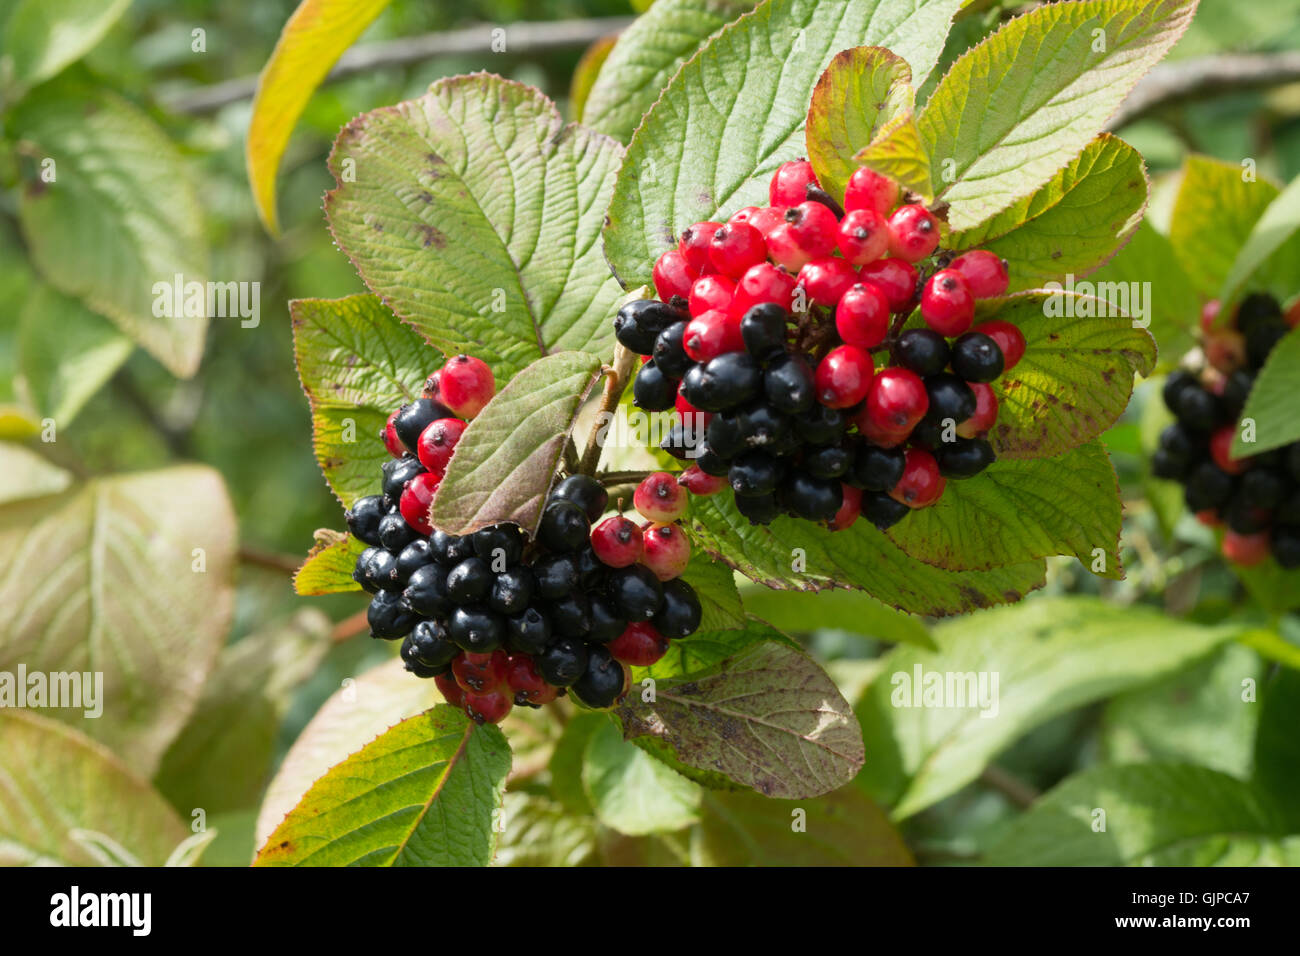 Lantana Berries High Resolution Stock Photography And Images Alamy